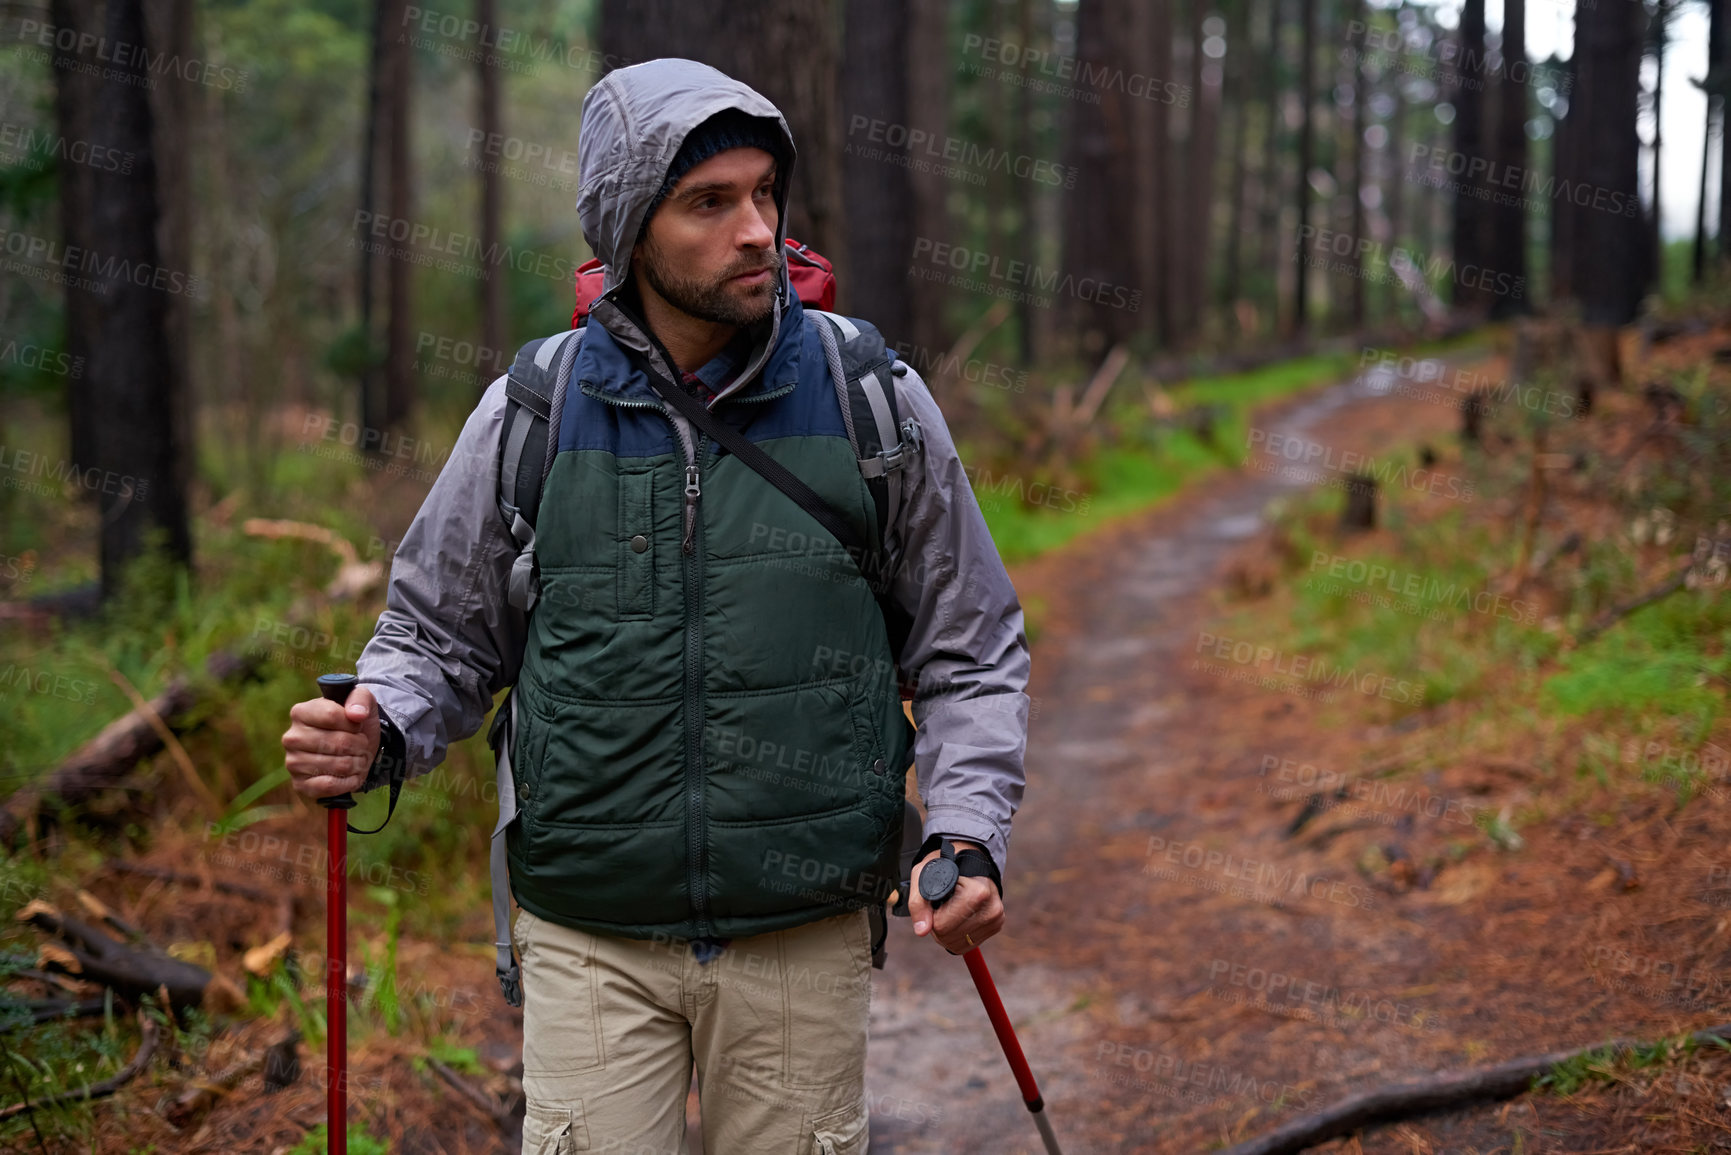 Buy stock photo Shot of a handsome man hiking in a pine forest using nordic walking poles